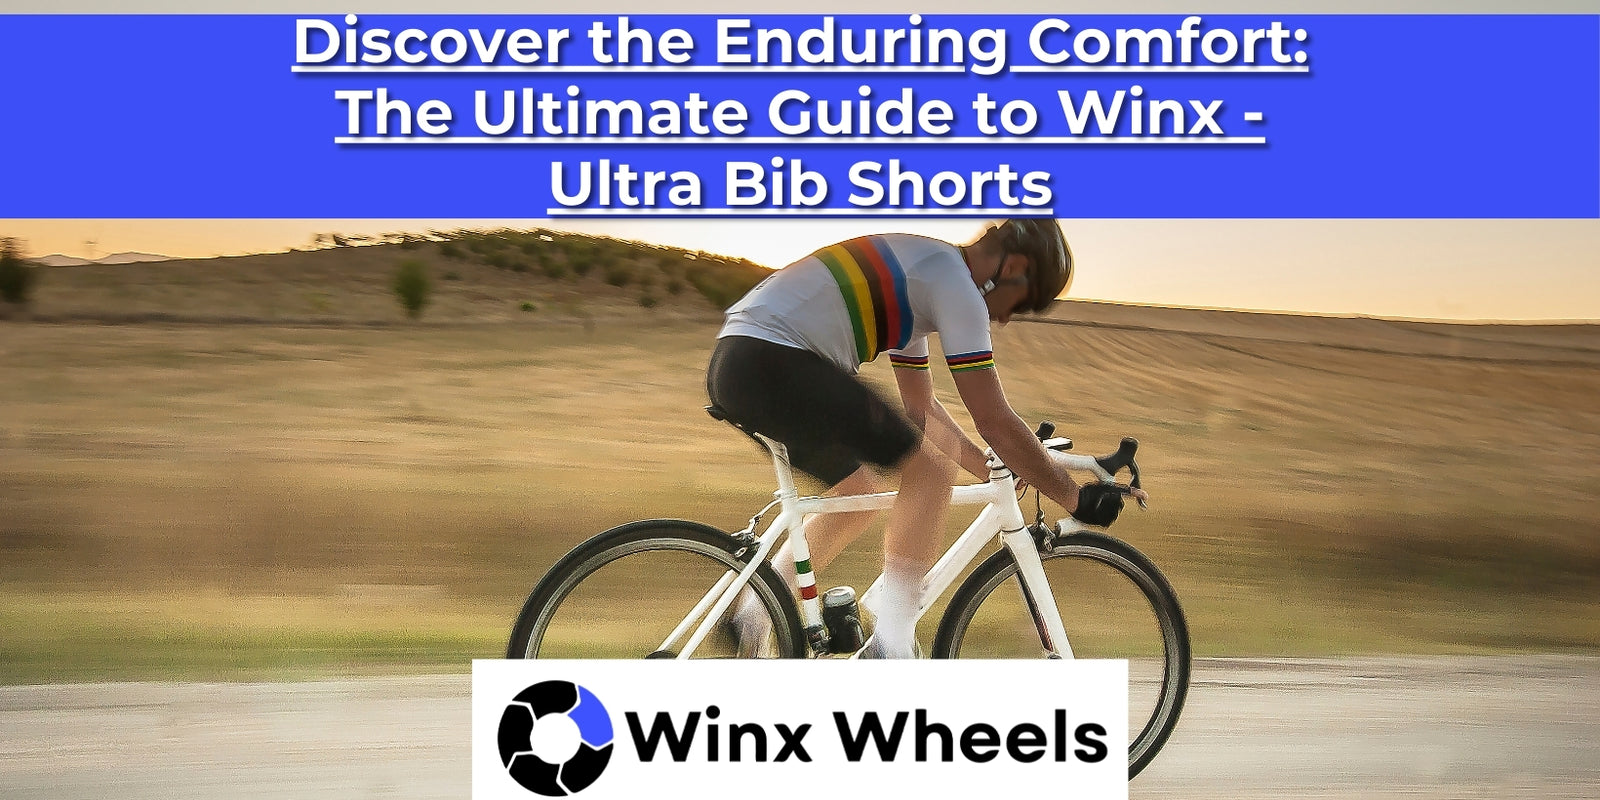 Discover the Enduring Comfort: The Ultimate Guide to Winx - Ultra Bib Shorts